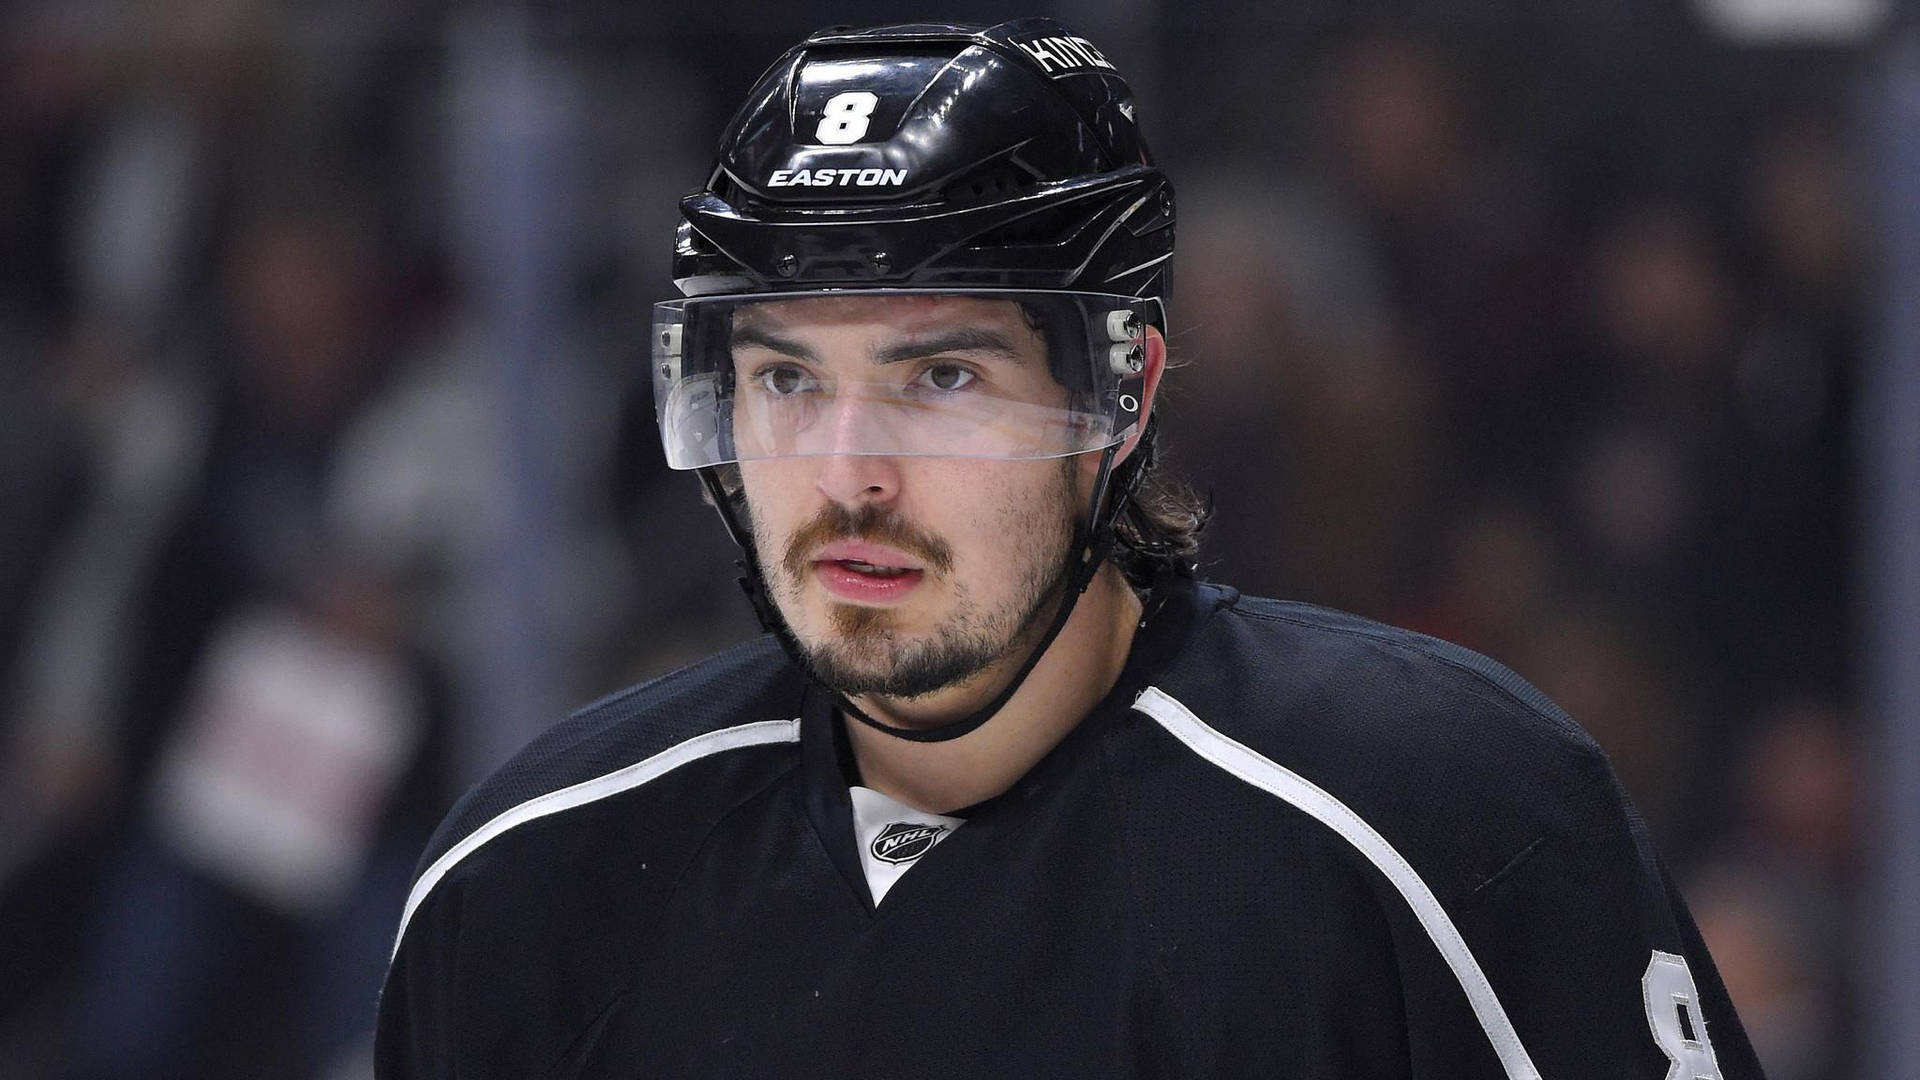 ESPN: 'They make you feel like you belong': How Drew Doughty and